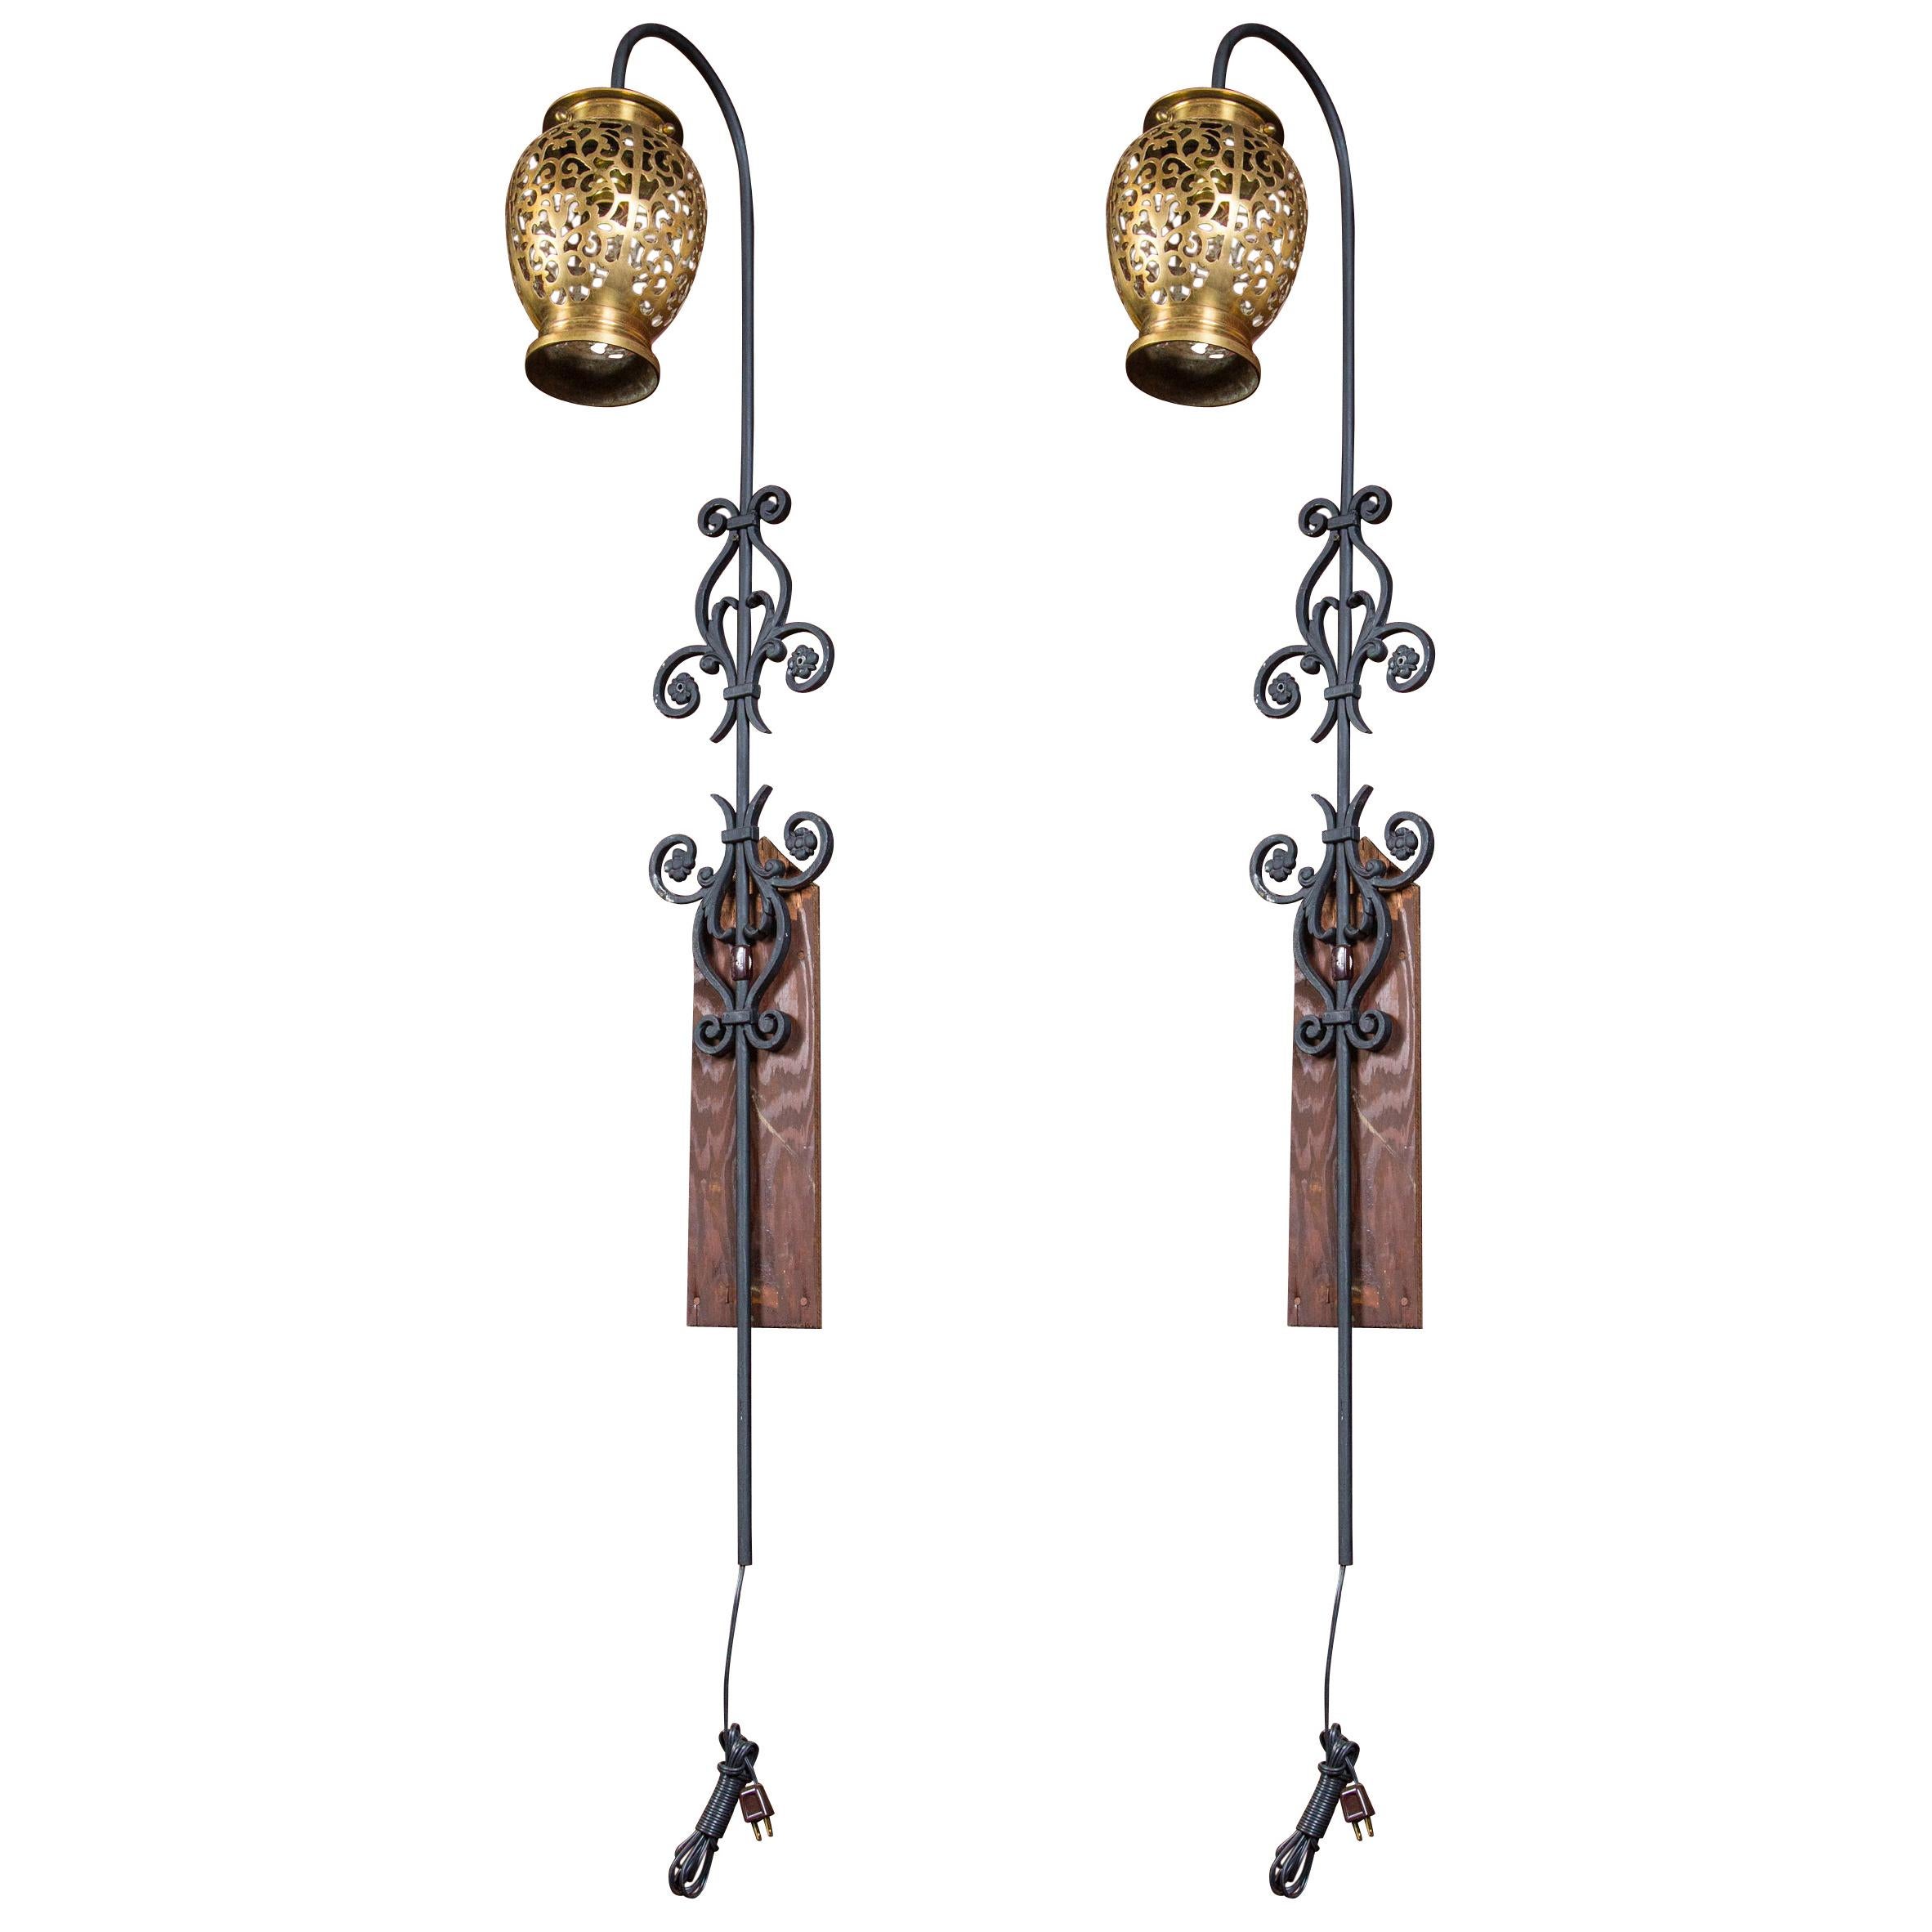 Pair of Tall Wrought Iron Wall Sconces with Hanging Brass Moroccan Lanterns